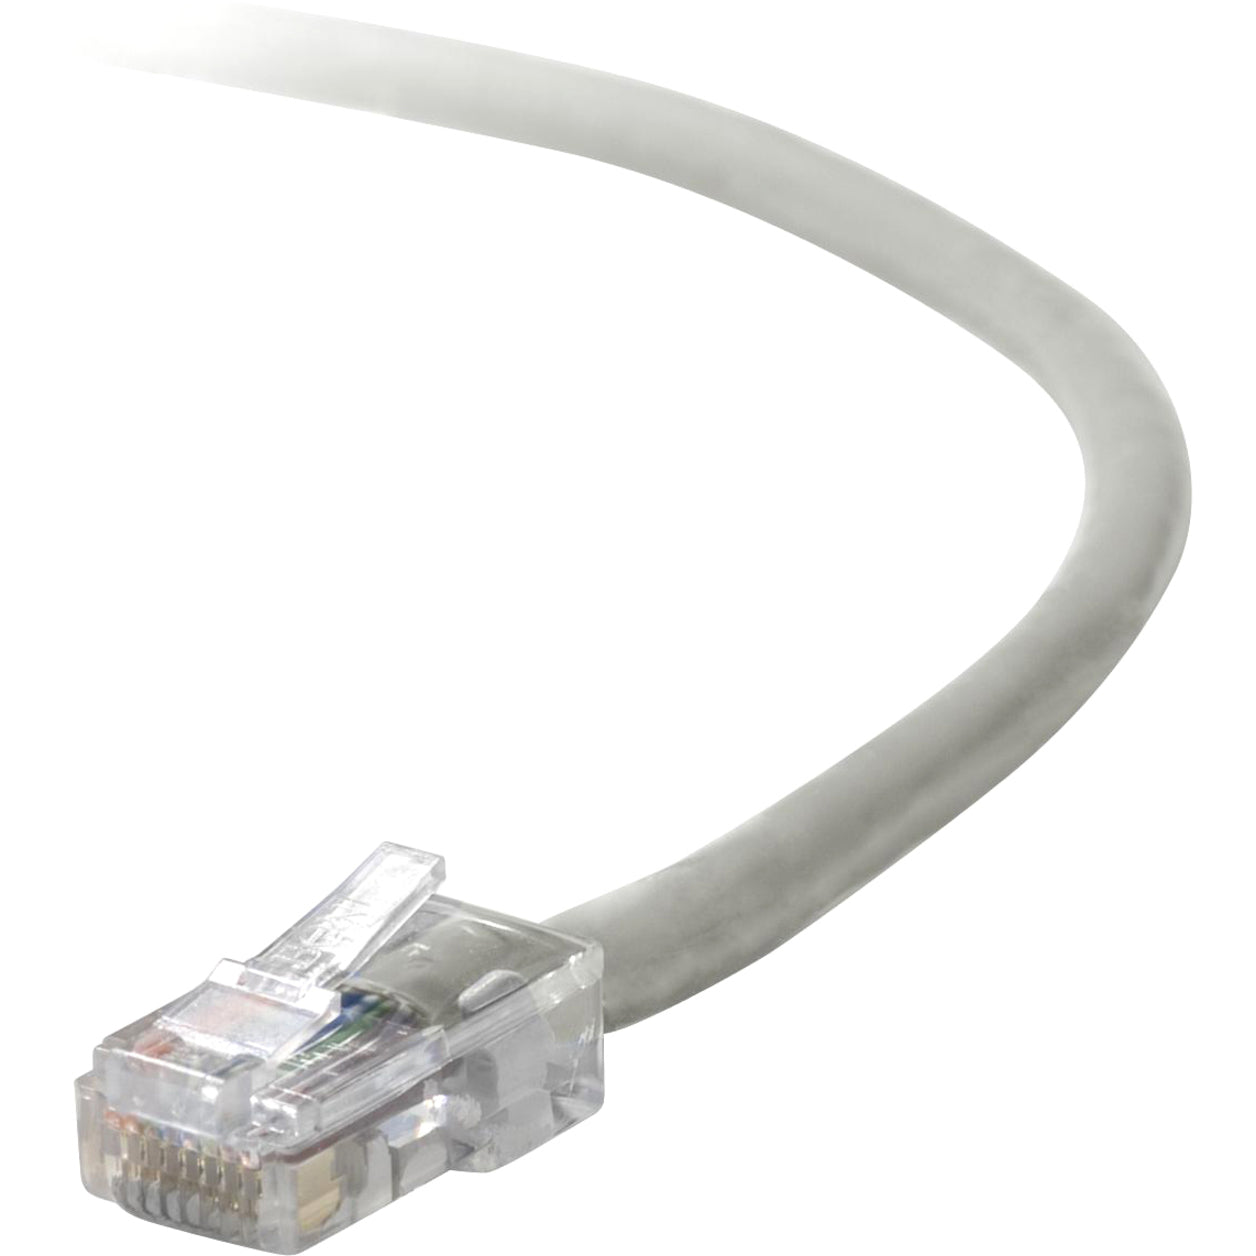 Belkin A3L791B25 CAT5e Patch Cable, 25 ft, Gray